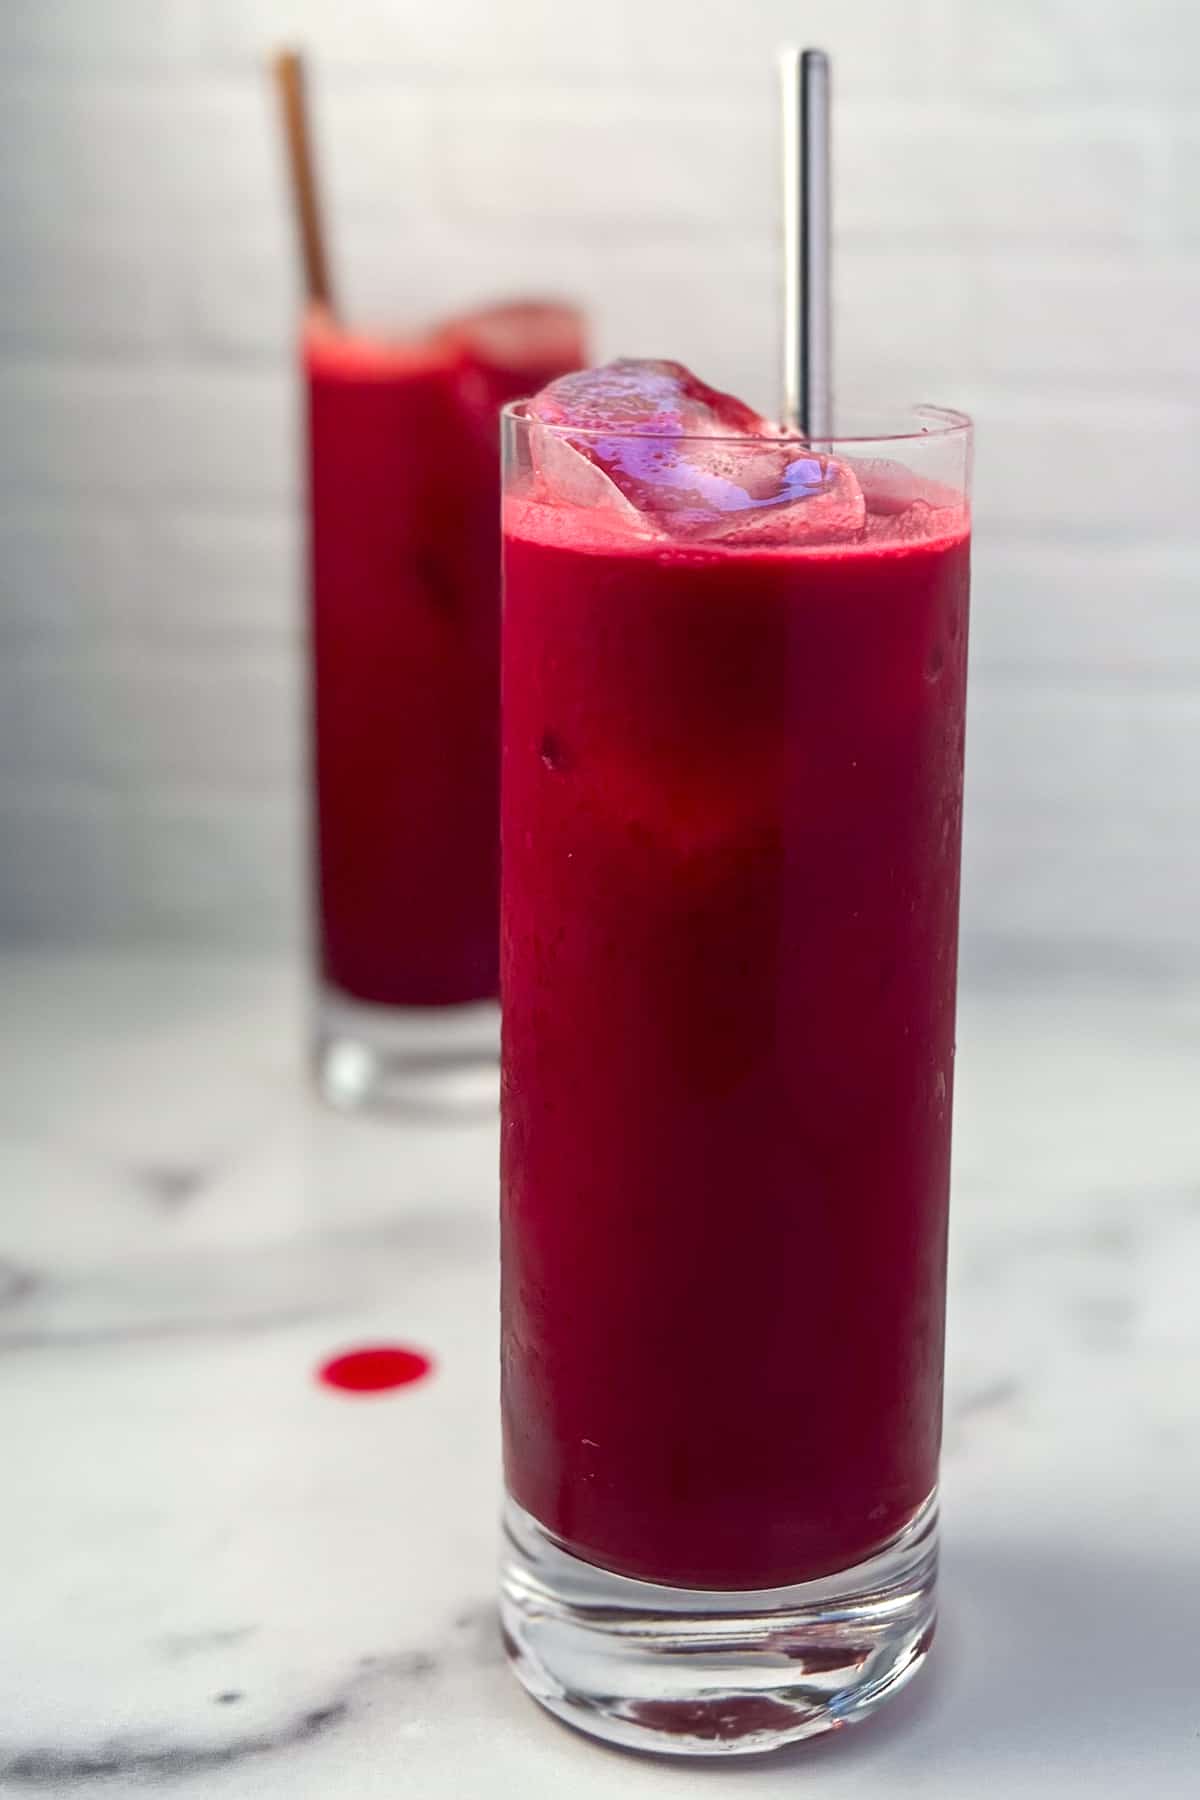 side view of tall glass of carrot beet apple juice with ice and metal straw sticking out; another glass of juice blurred in the background